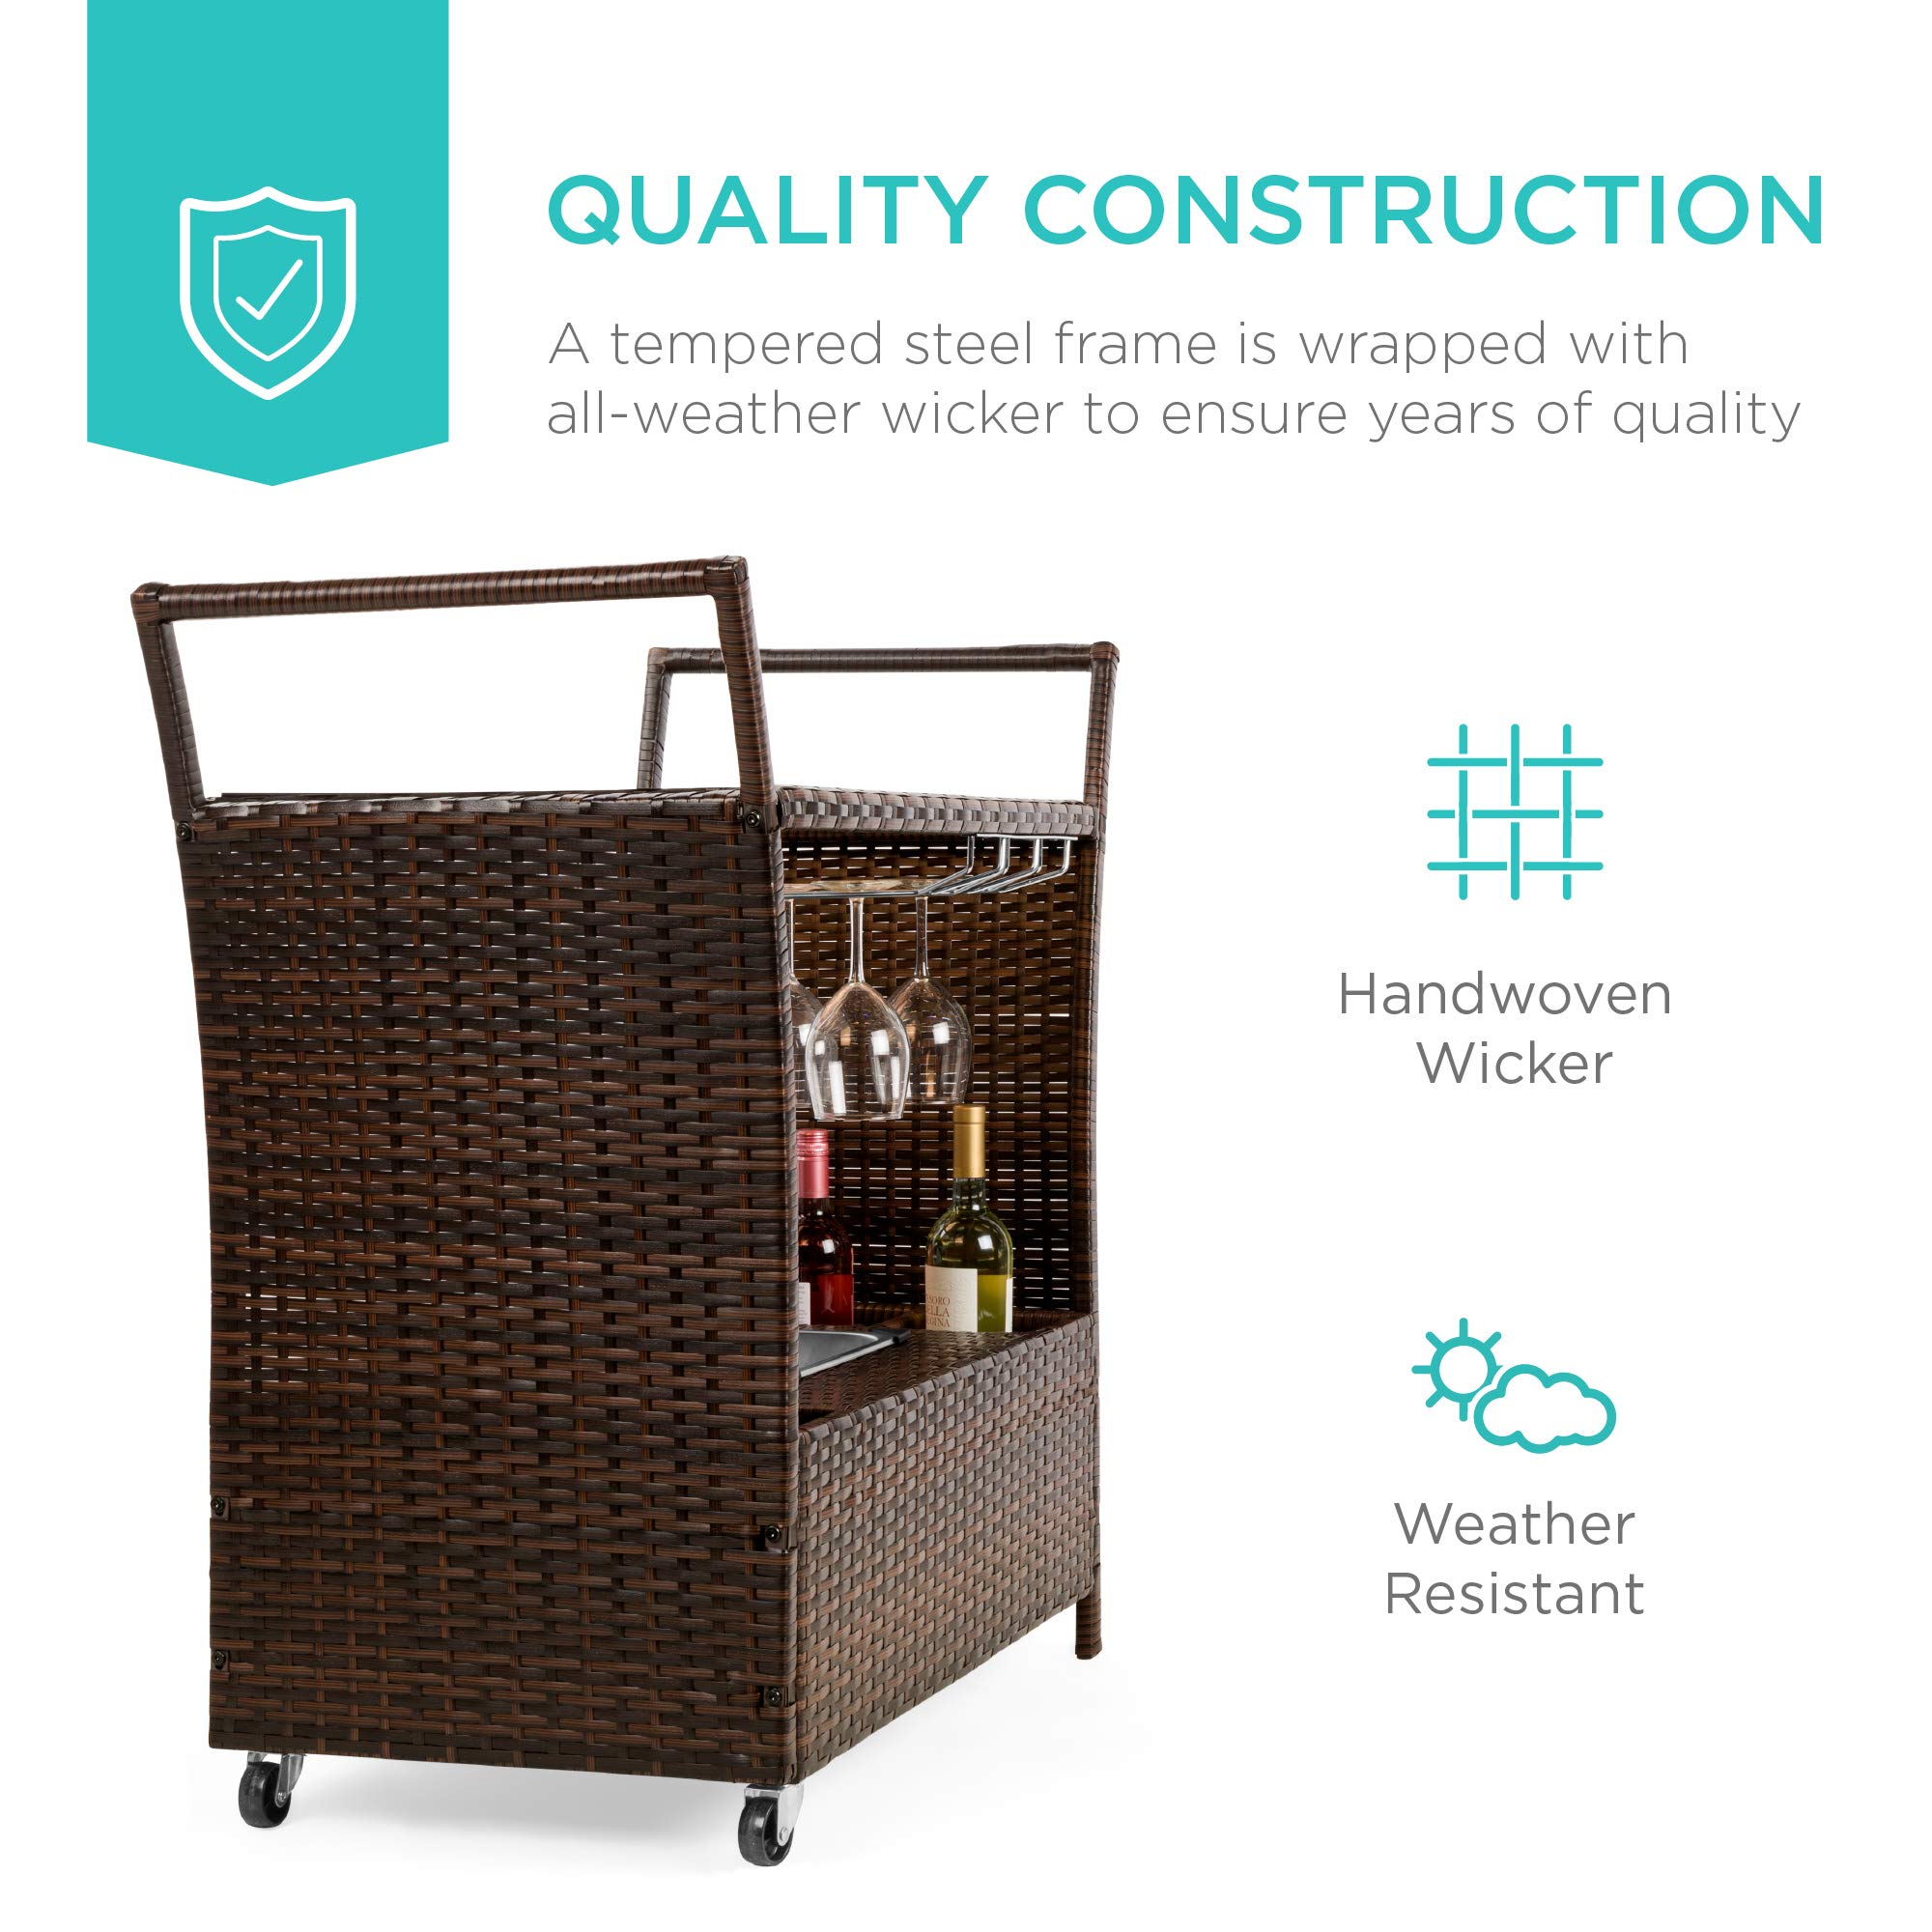 Best Choice Products Outdoor Rolling Wicker Bar Cart w/Removable Ice Bucket, Glass Countertop, Wine Glass Holders, Storage Compartments - Brown